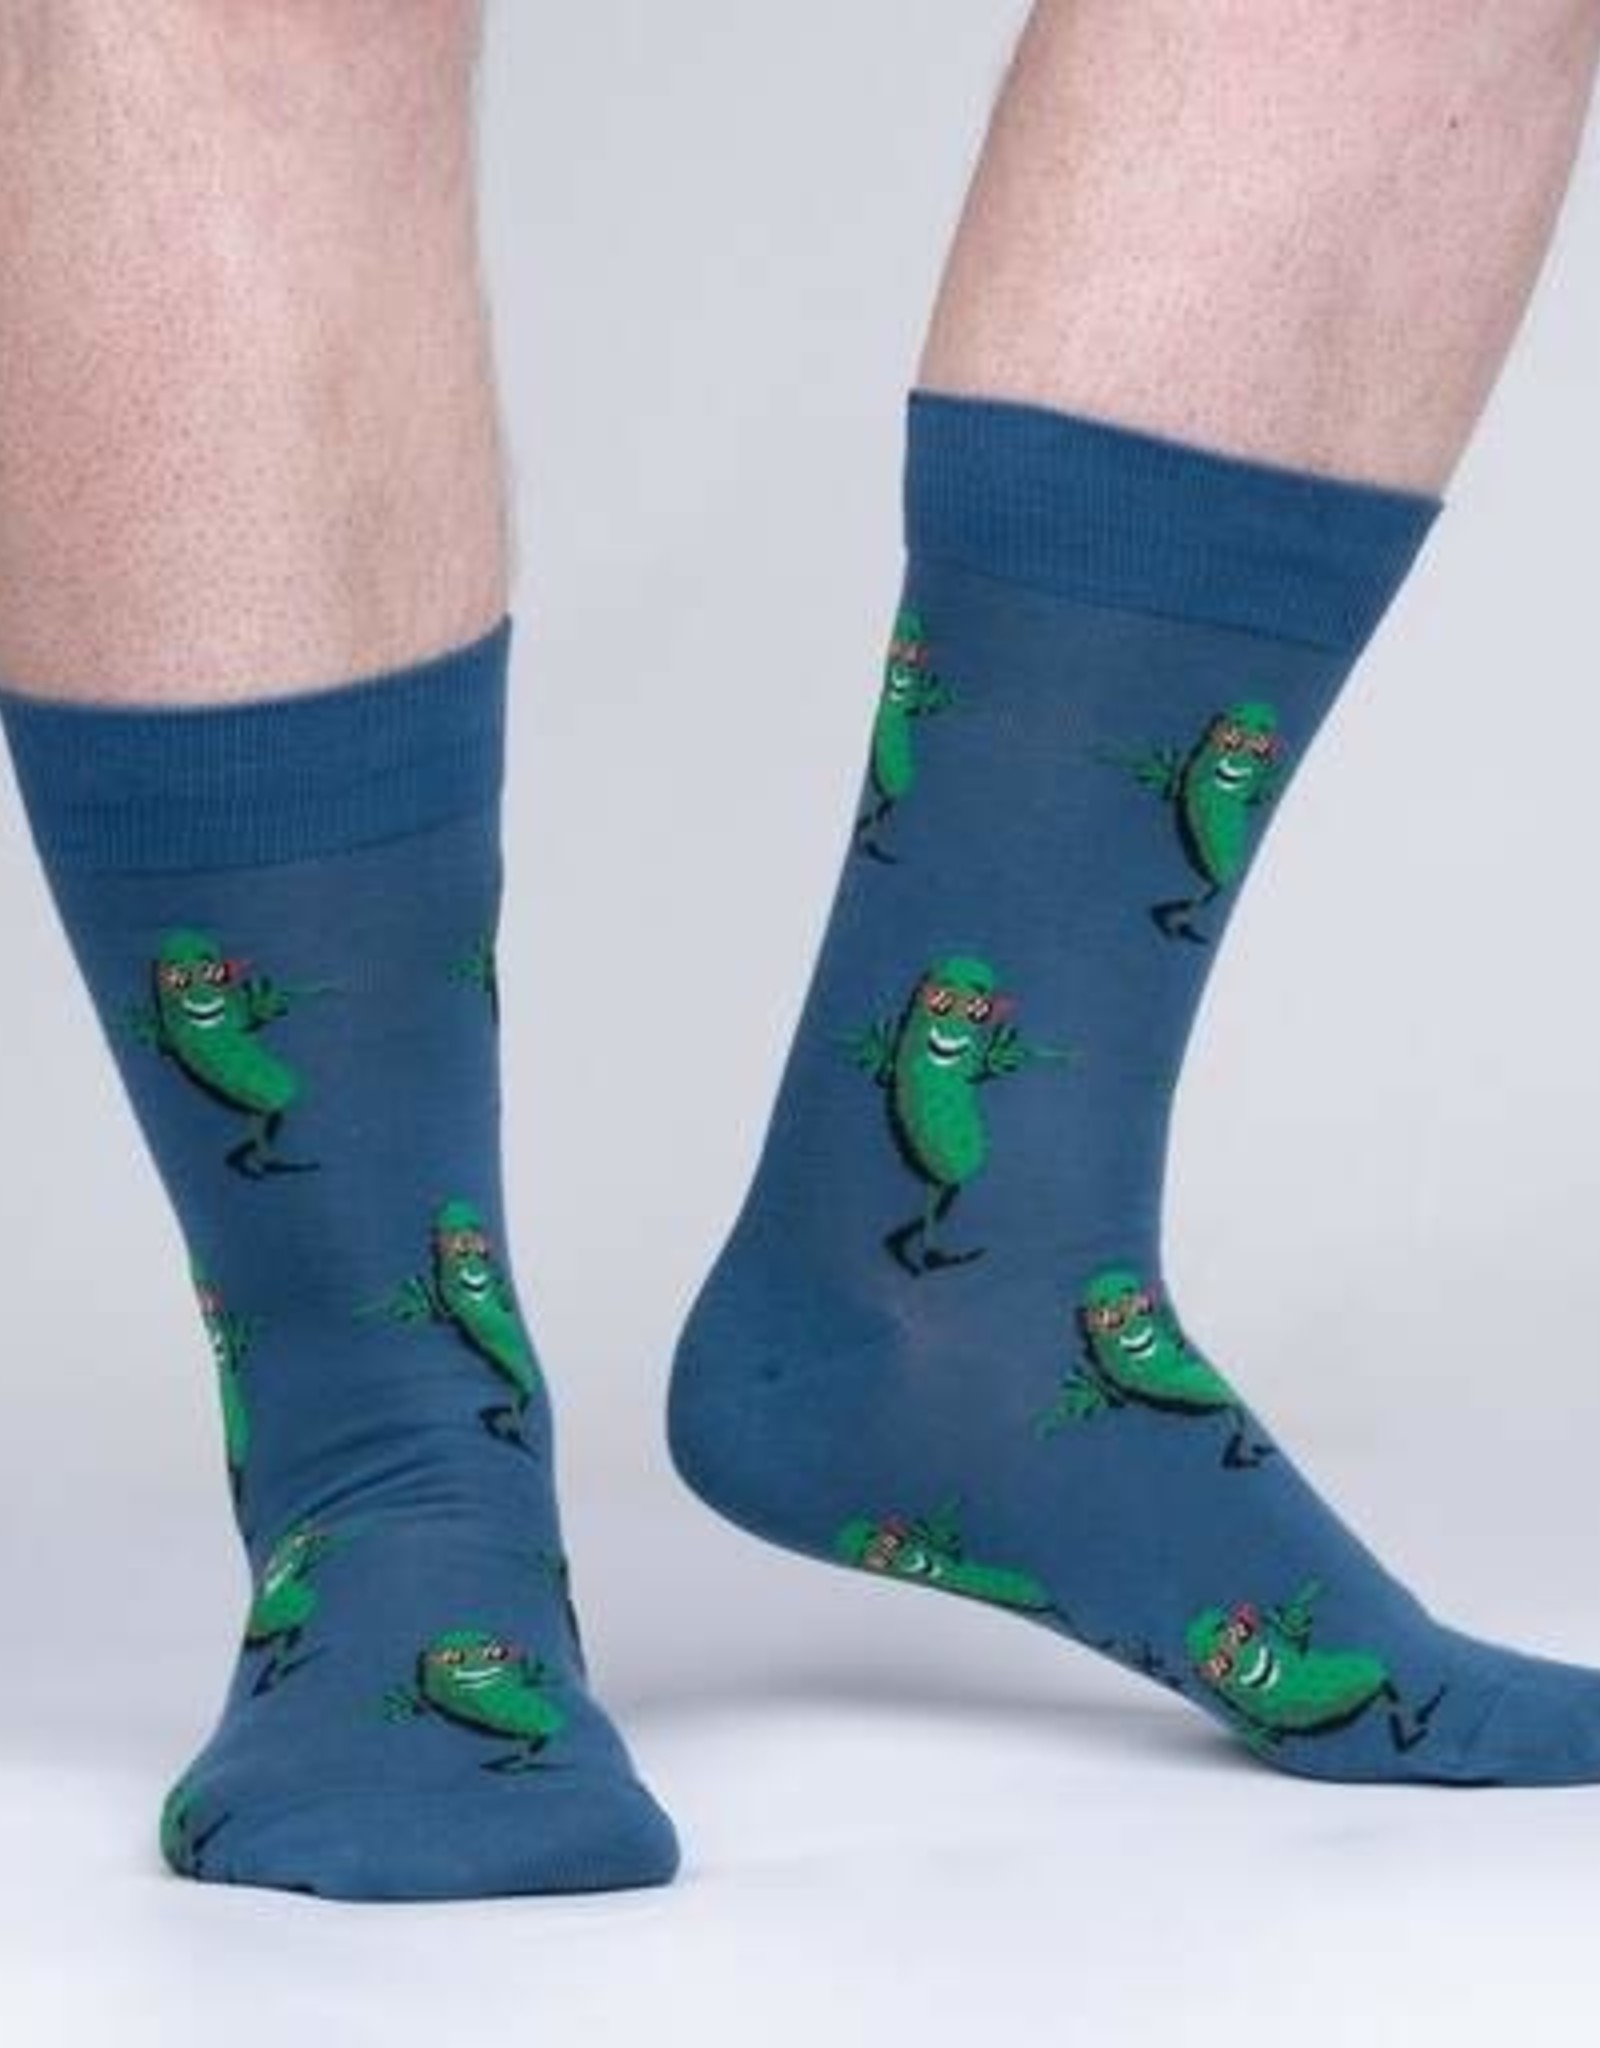 Sock It To Me MEN'S CREW - KIND OF A BIG DILL